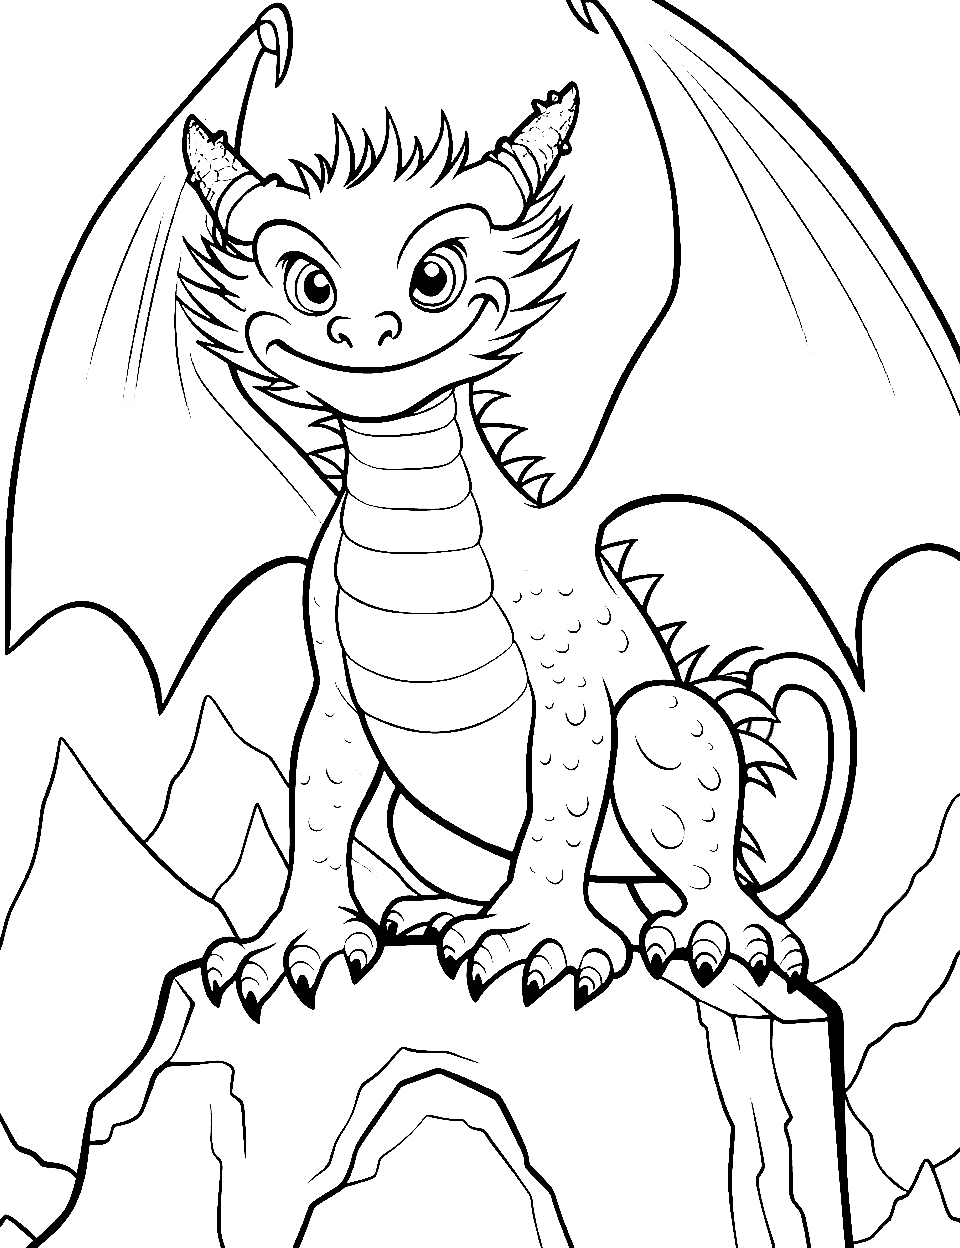 Realistic Dragon Perched on a Cliff Monster Coloring Page - A majestic dragon monster sitting atop a rocky cliff, overlooking a vast landscape.